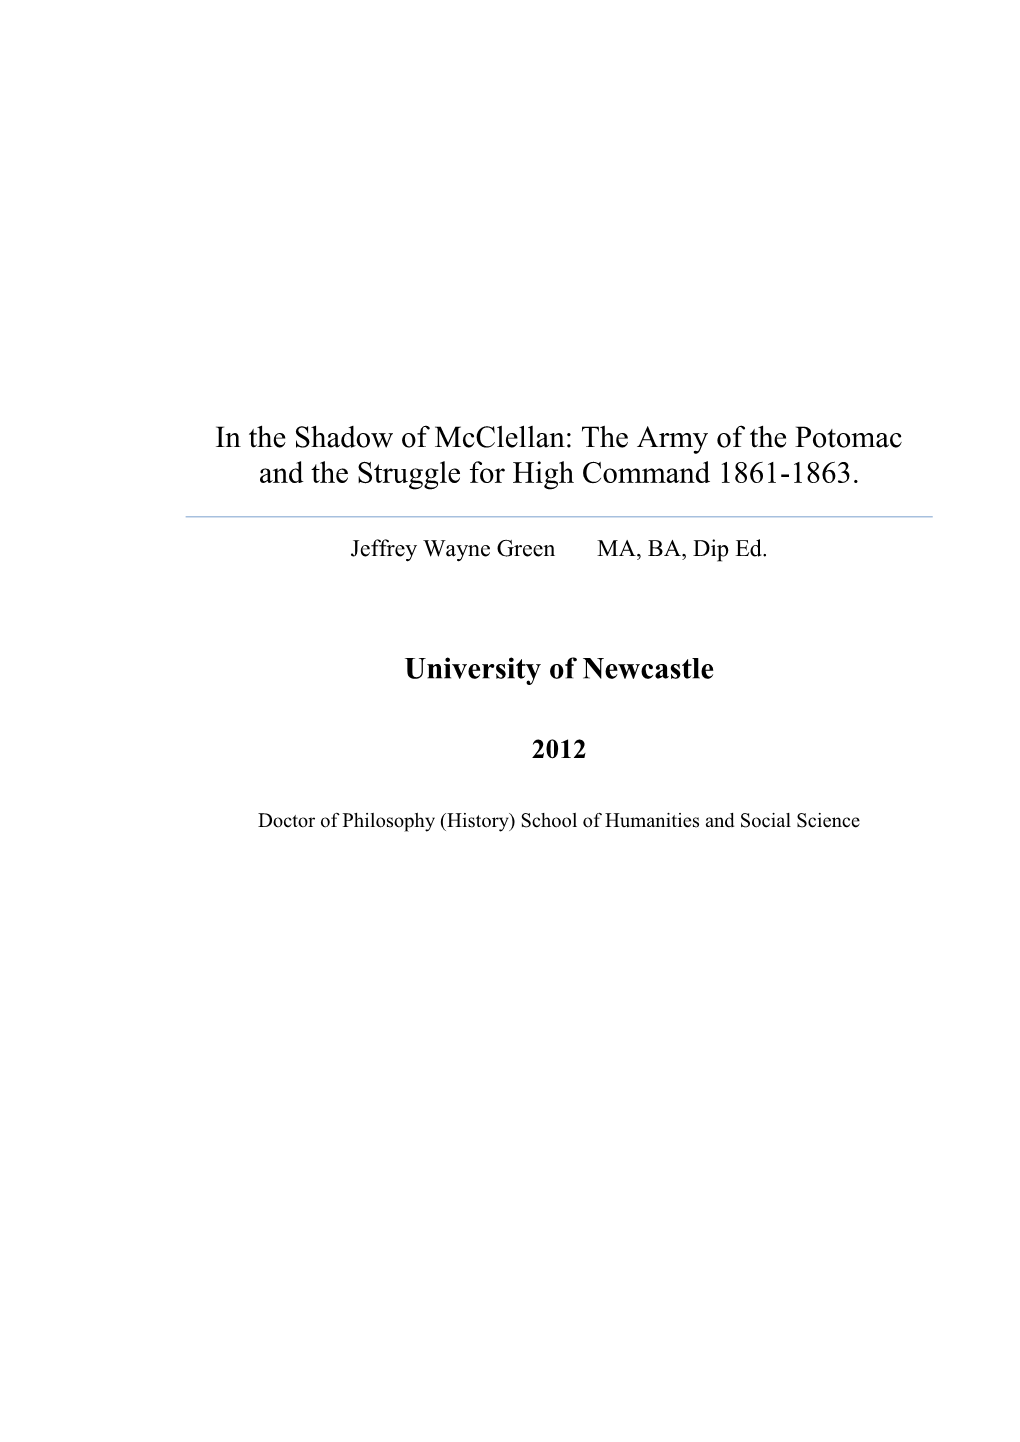 In the Shadow of Mcclellan: the Army of the Potomac and the Struggle for High Command 1861-1863